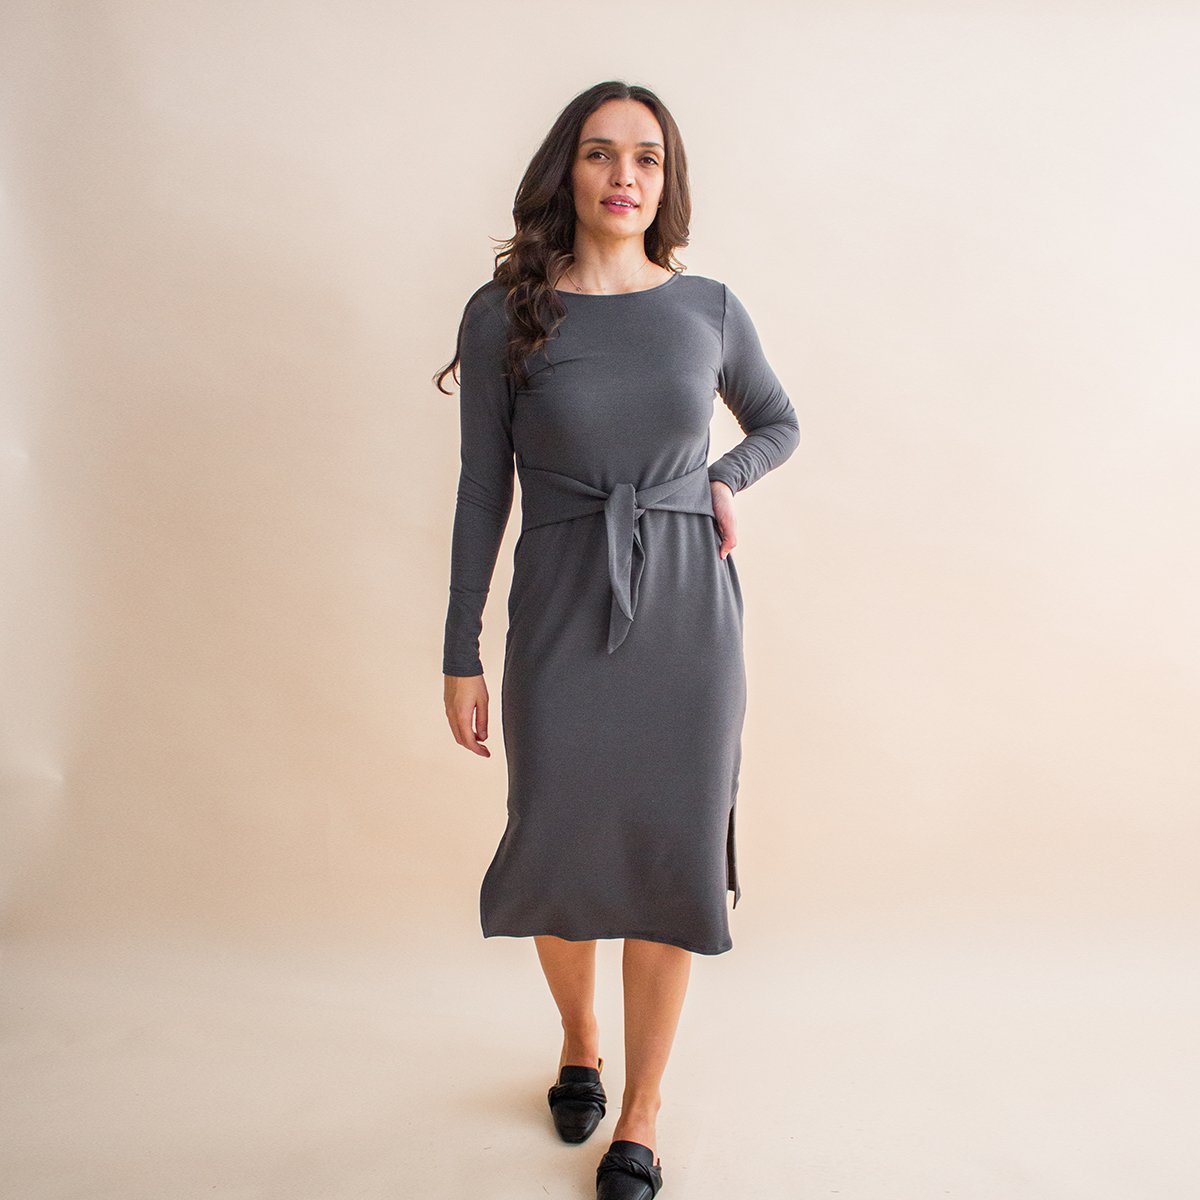 The Everyday House Dress by Encircled